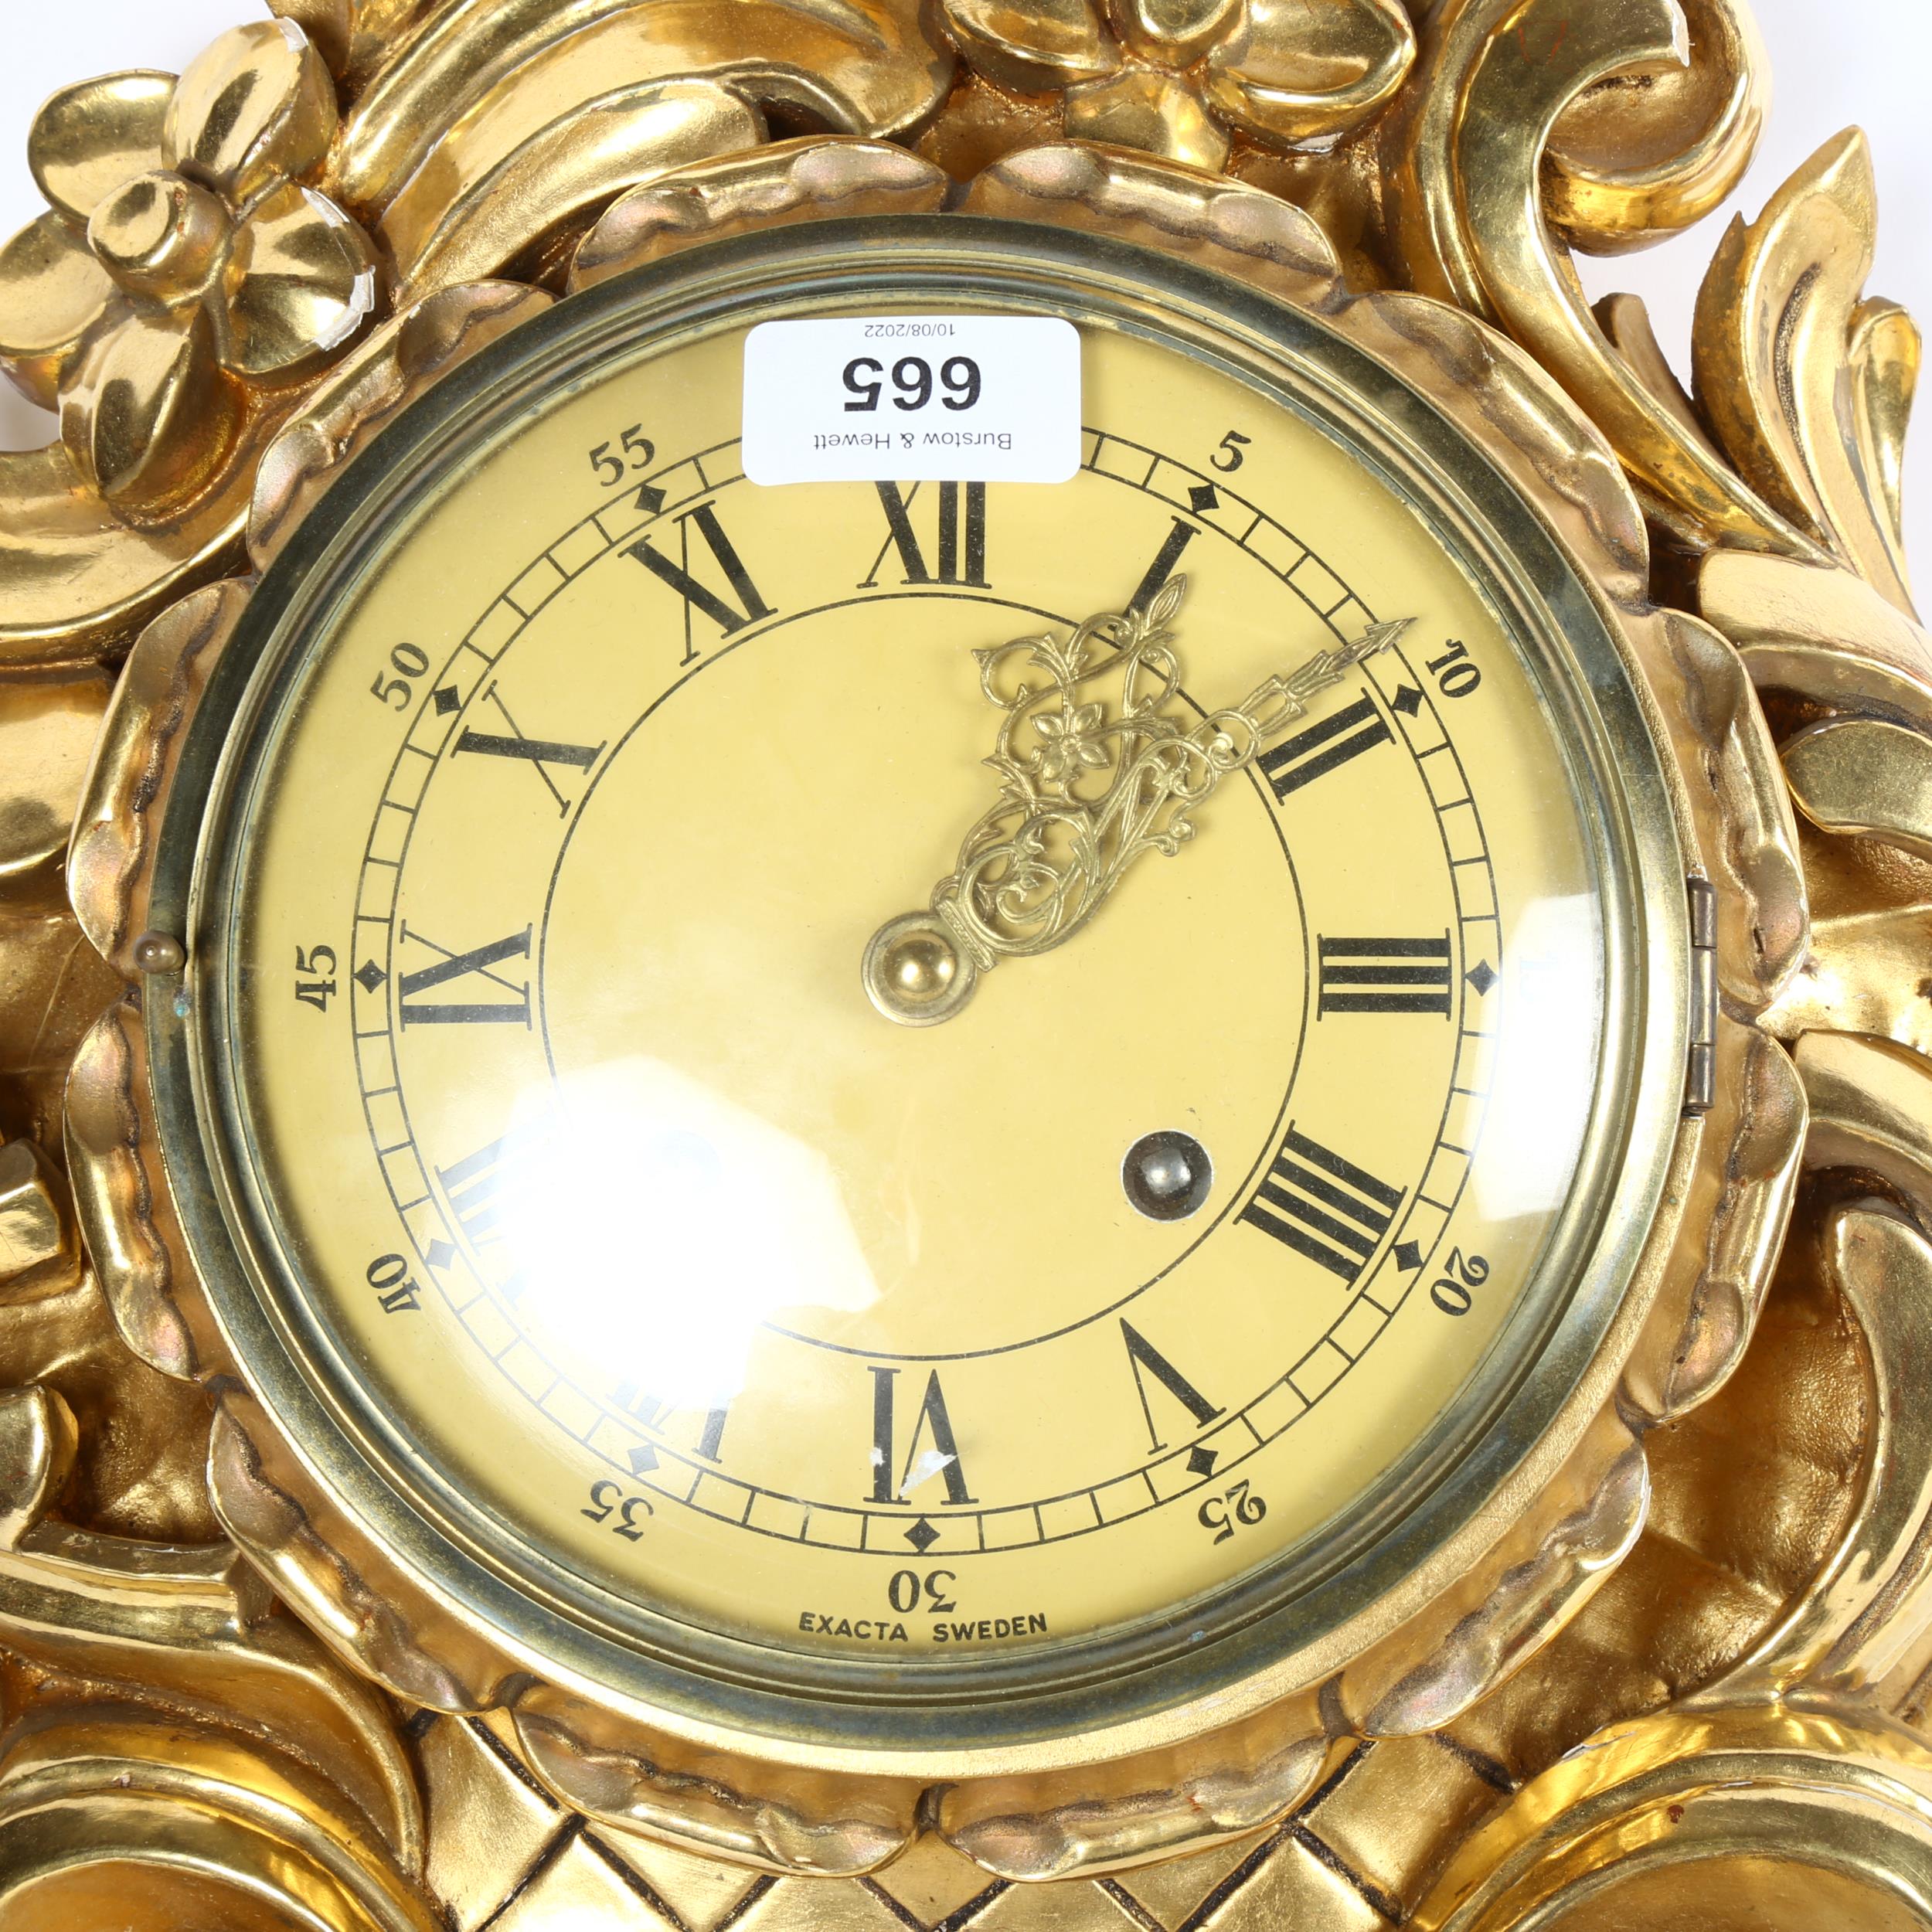 A reproduction gilt-gesso Cartel clock, with 8-day movement, by Exacta, Sweden, height 60cm - Image 2 of 2